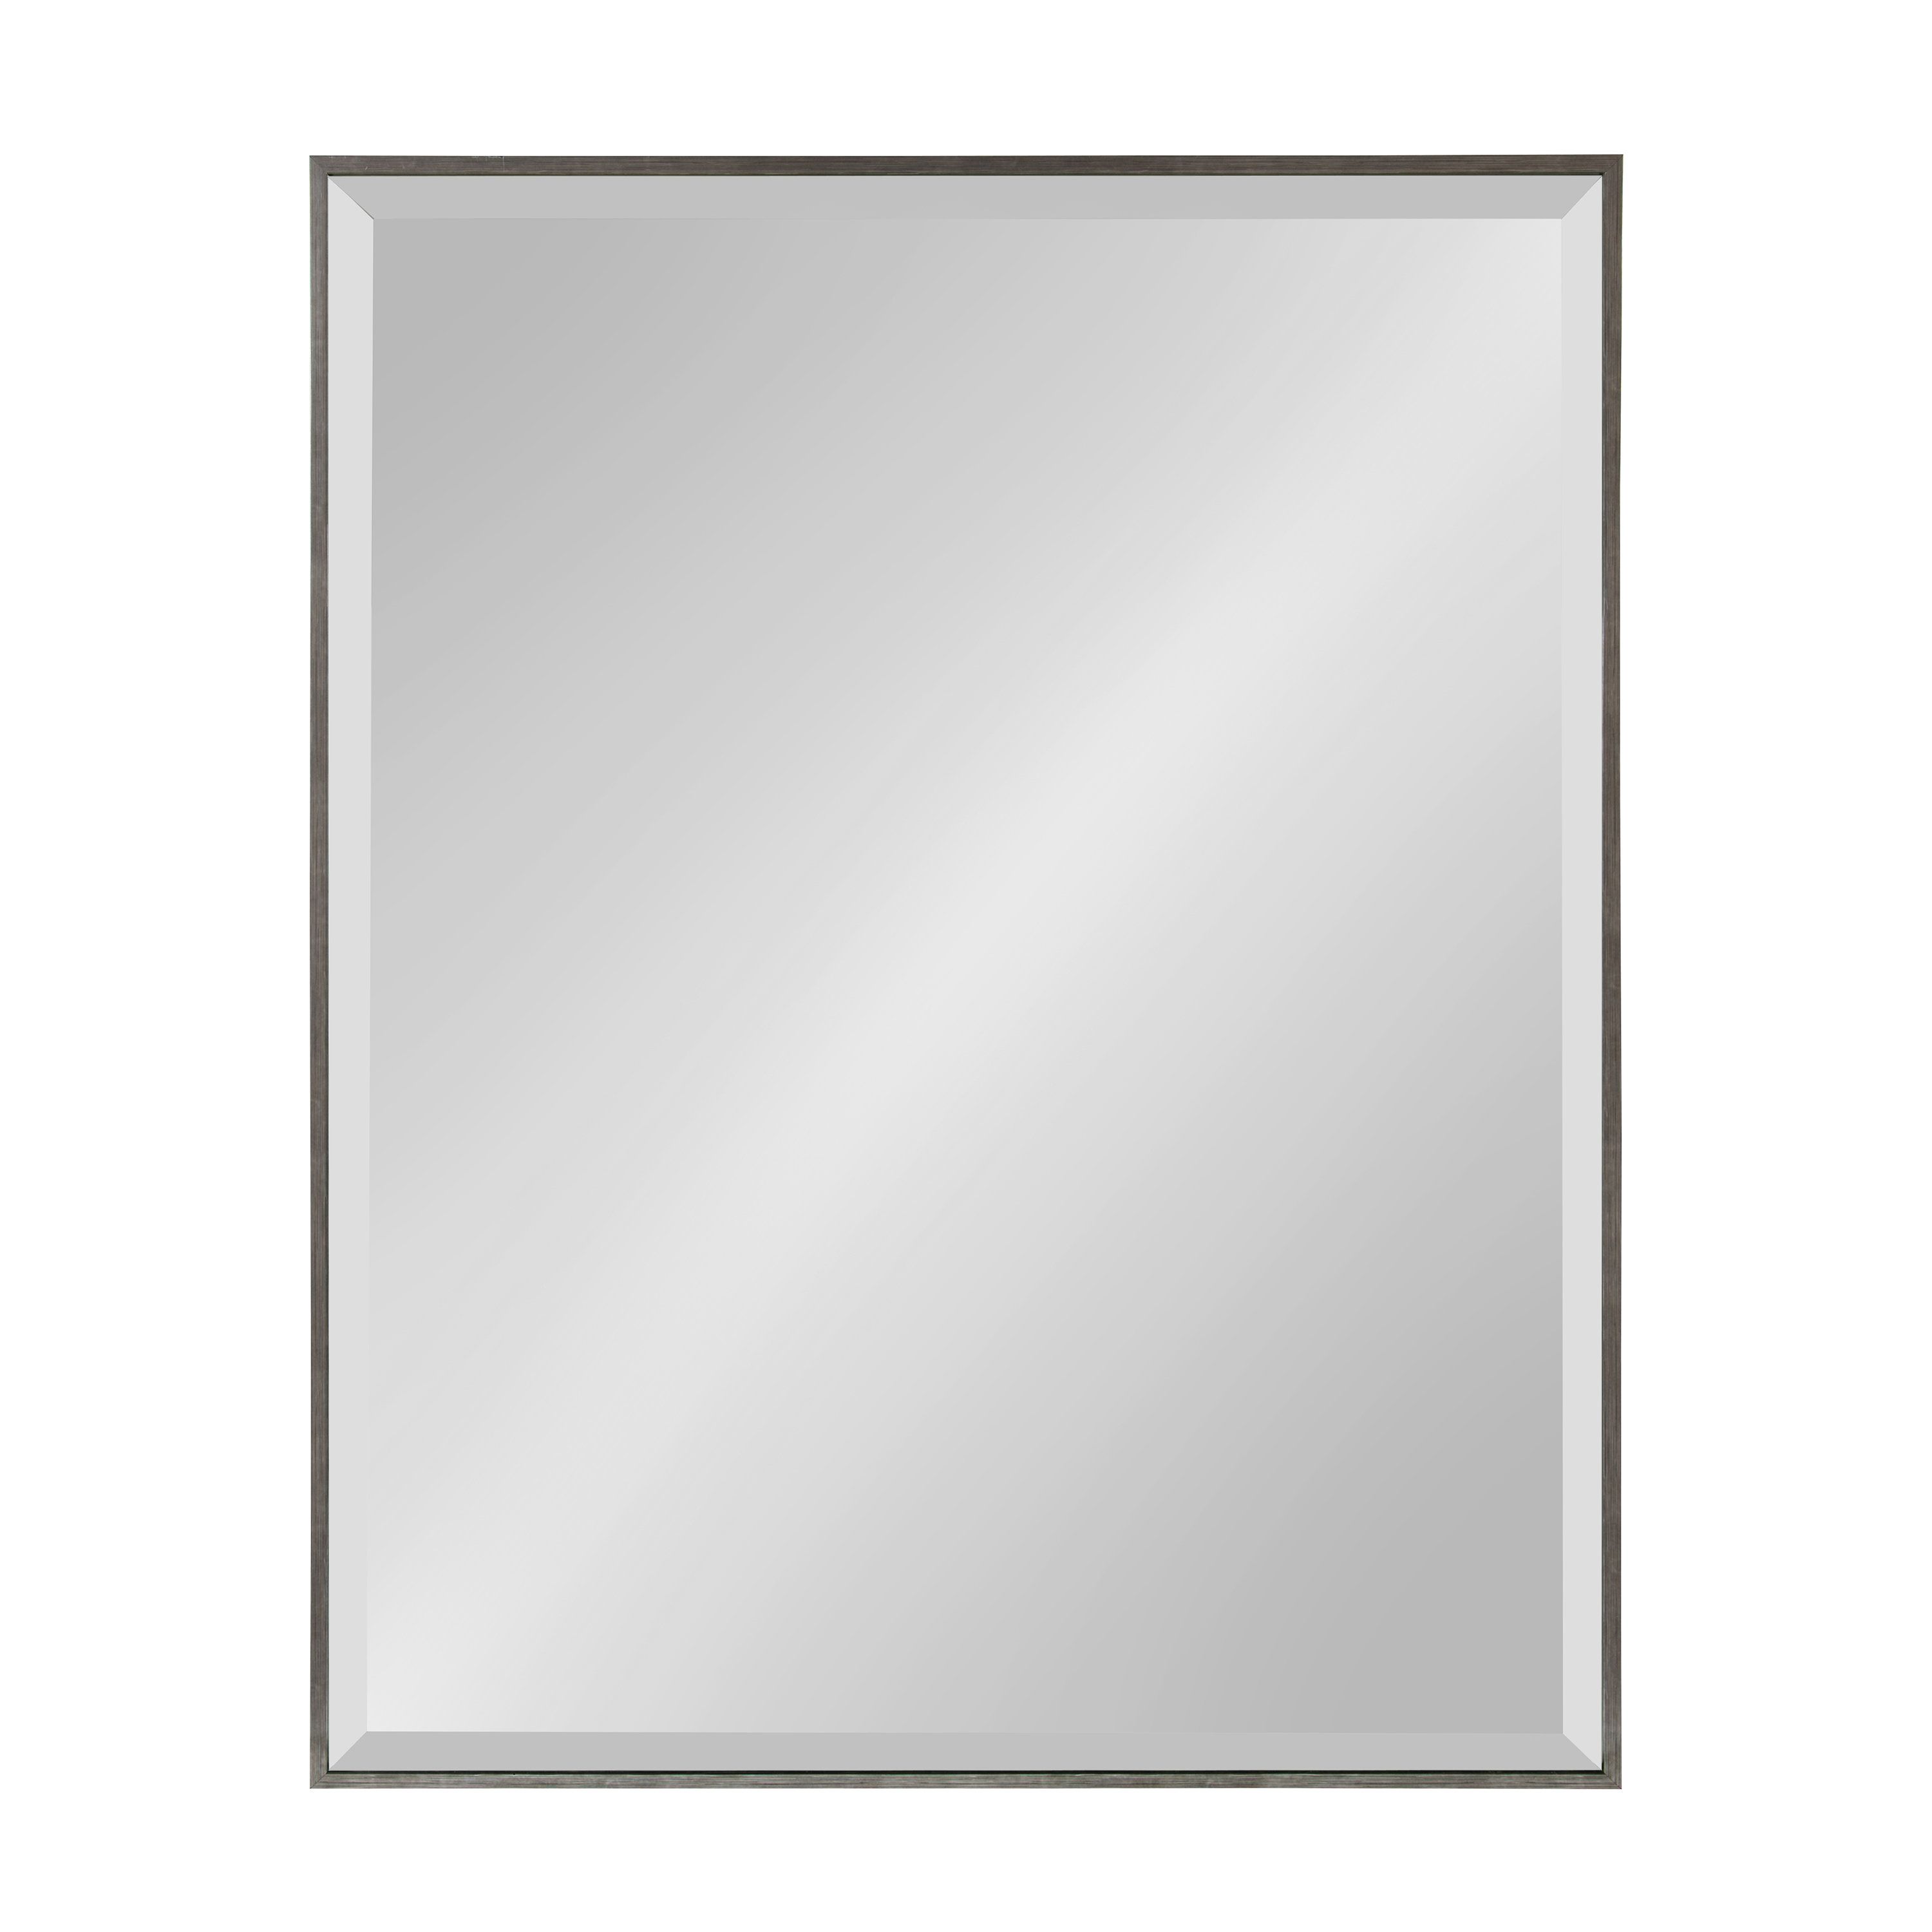 Logsdon Traditional Beveled Accent Mirror Pertaining To Traditional Beveled Accent Mirrors (View 7 of 20)